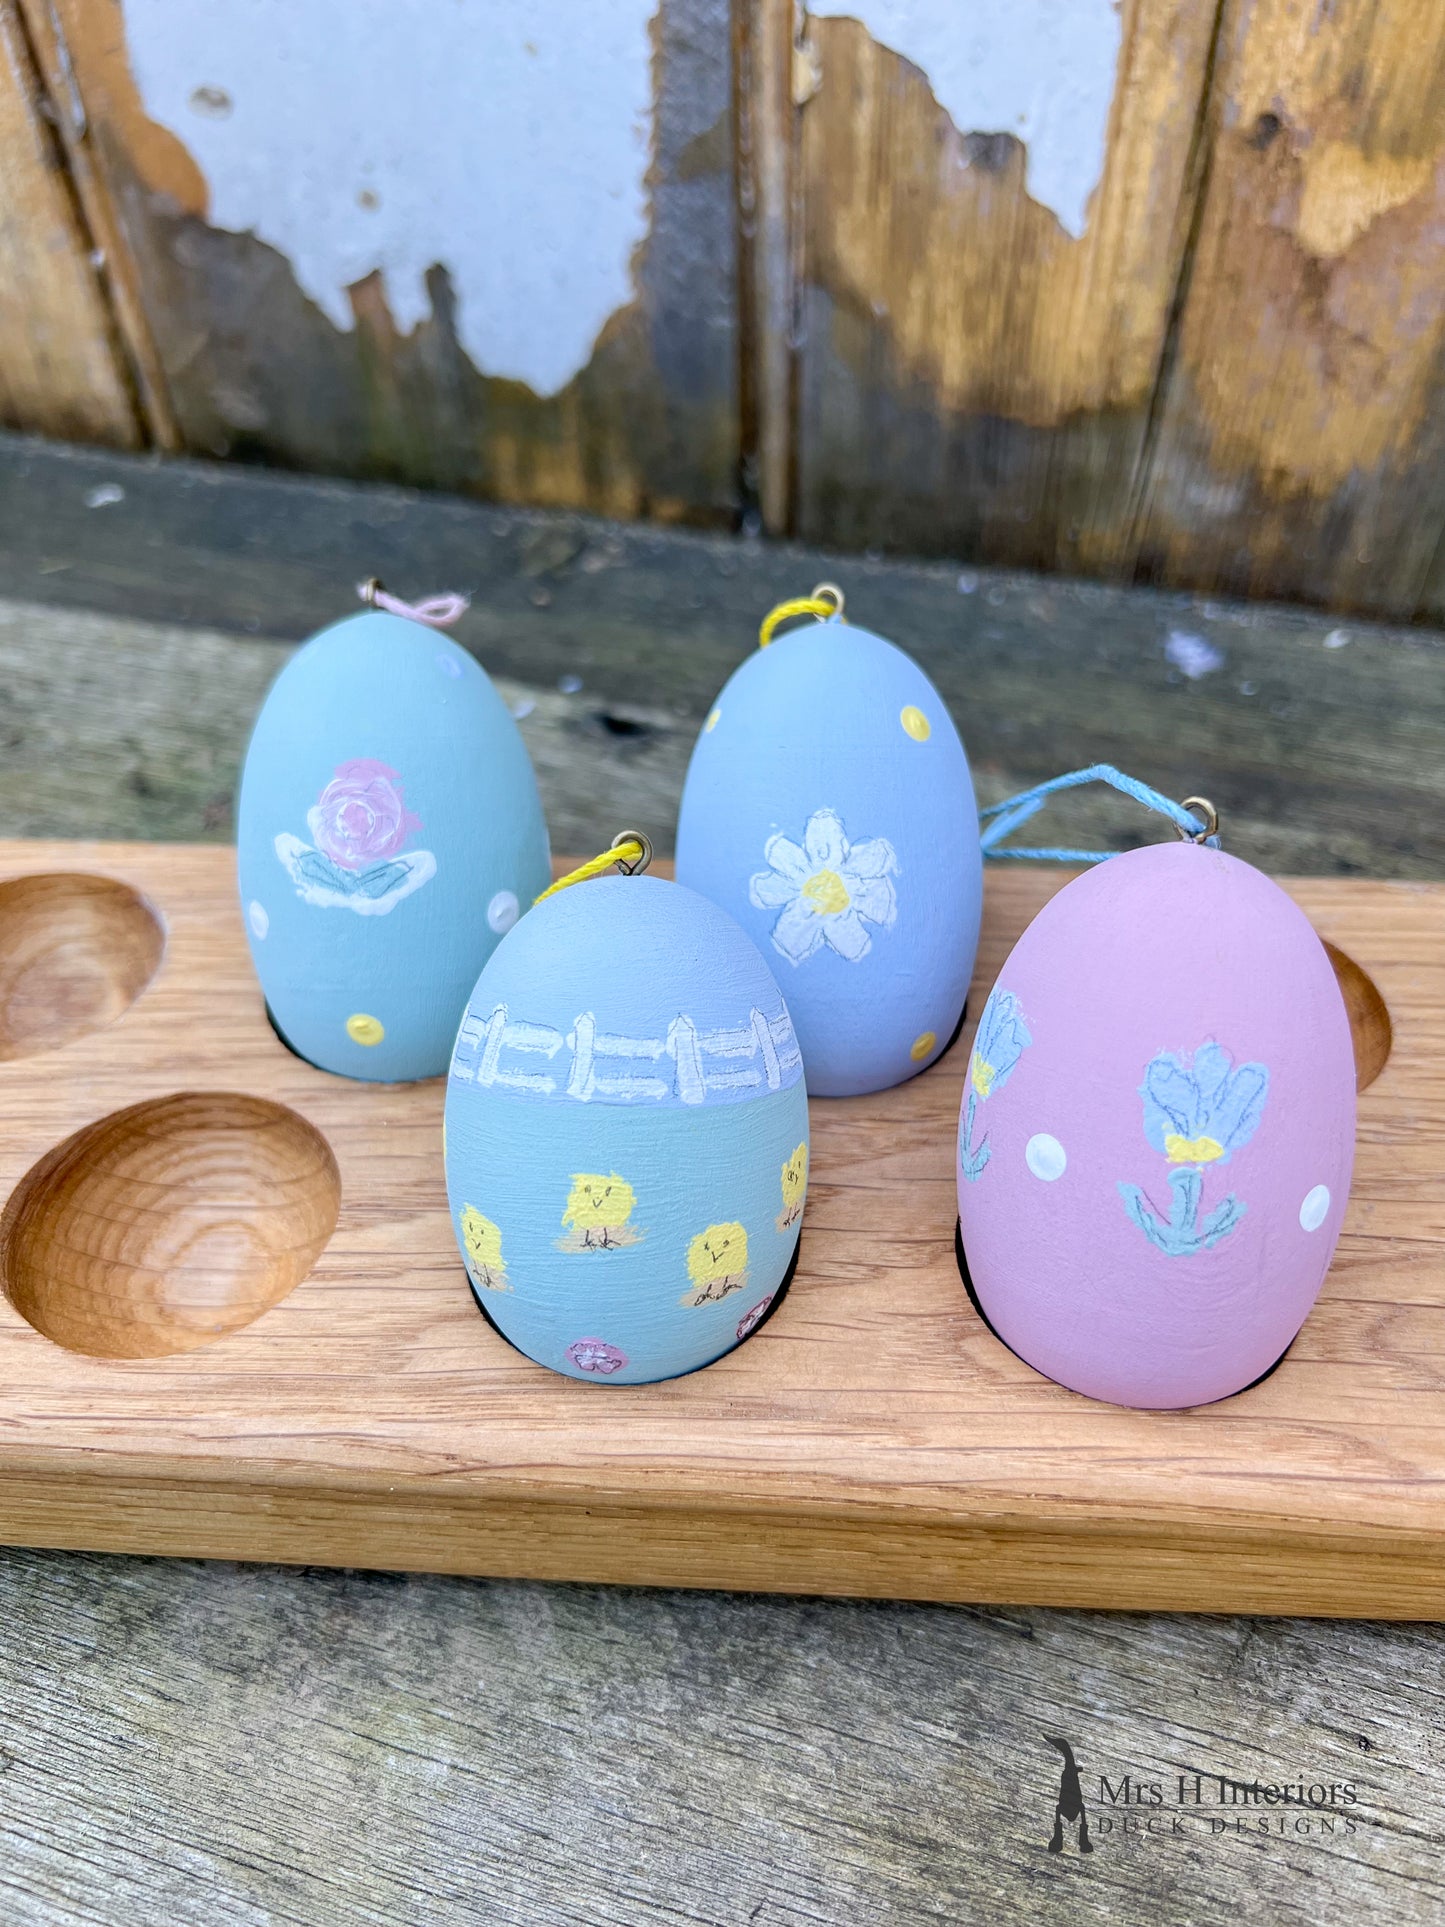 Easter Egg Hunt Solid Wooden Egg Painting Kit - Wooden Easter Egg Hunt Paint Your Own Activity Gift Set by Mrs H The Duck Lady